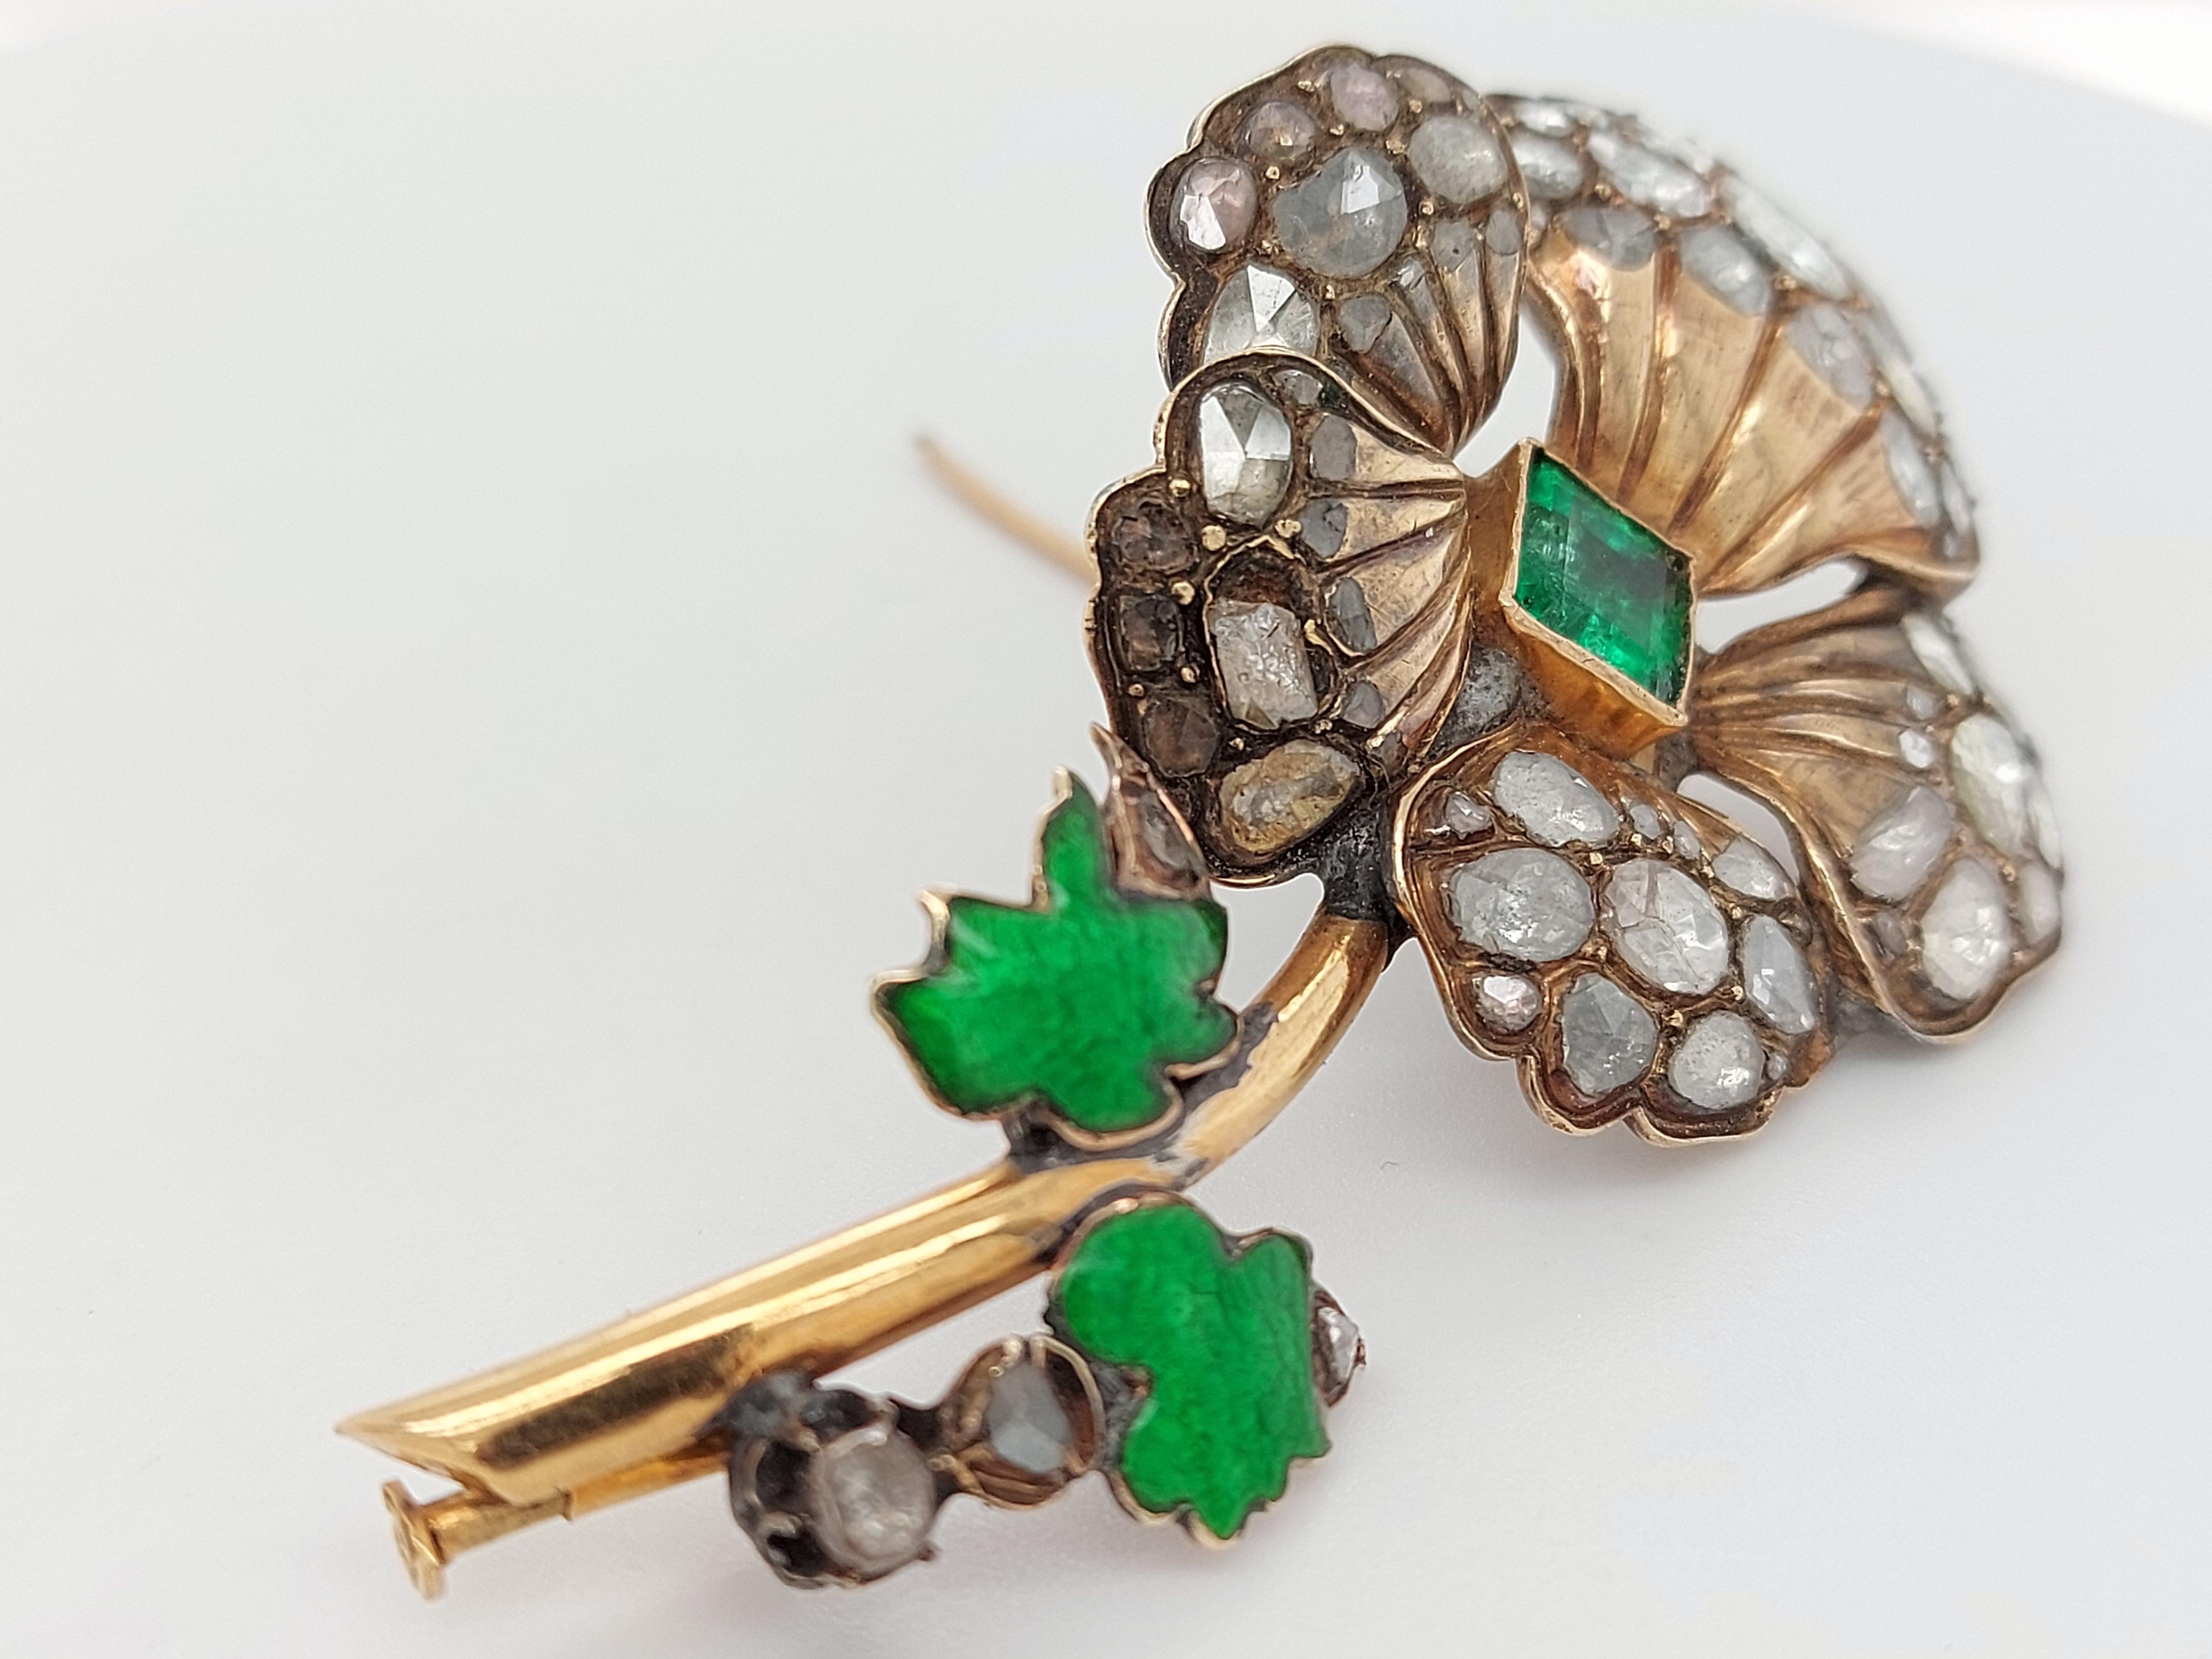 Silver and 14kt Gold Flower Brooch, Rose Cut Diamonds, Colombia Emerald, Enamel For Sale 6